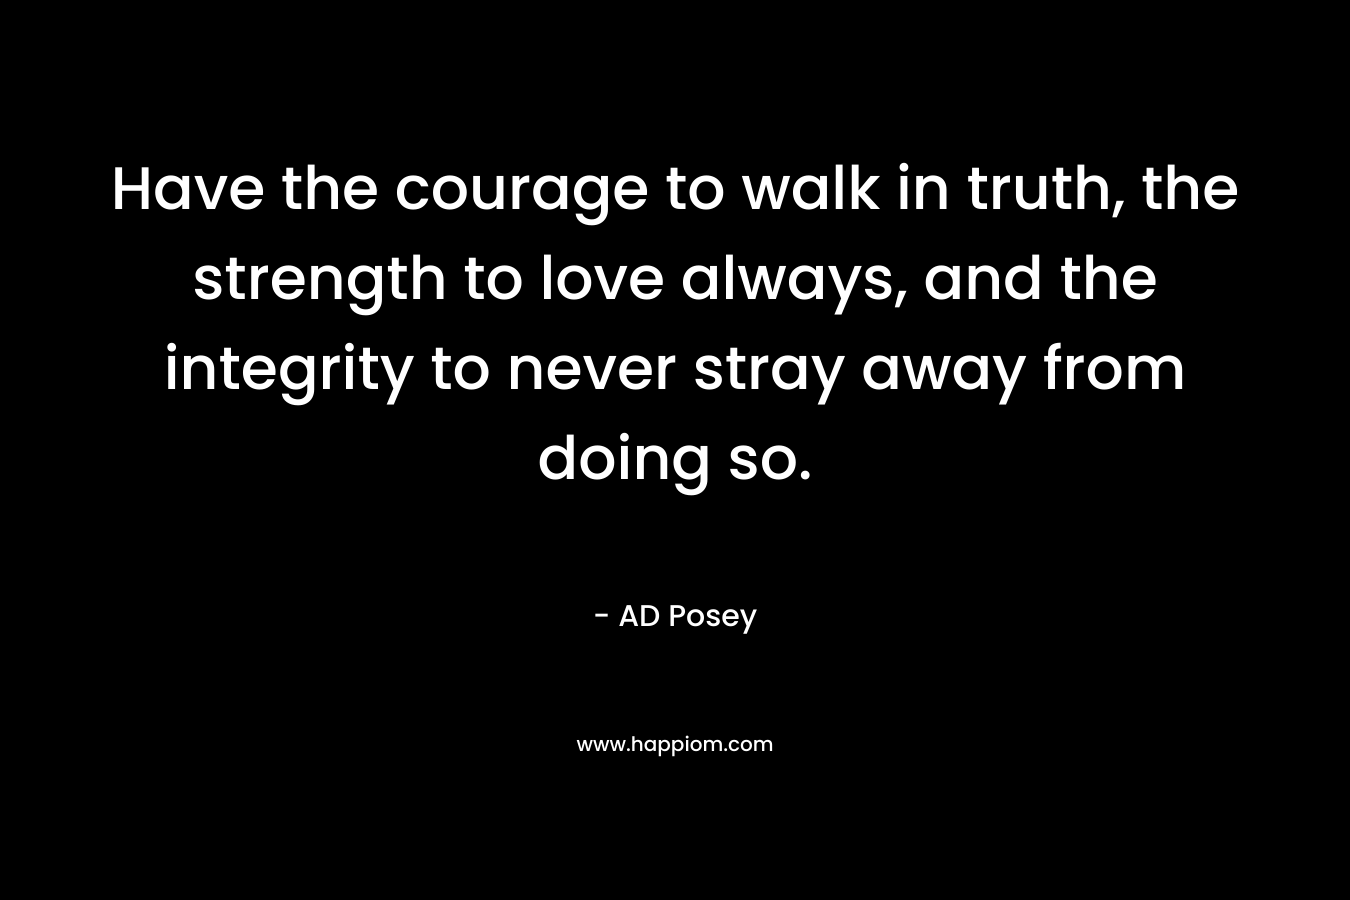 Have the courage to walk in truth, the strength to love always, and the integrity to never stray away from doing so. – AD Posey